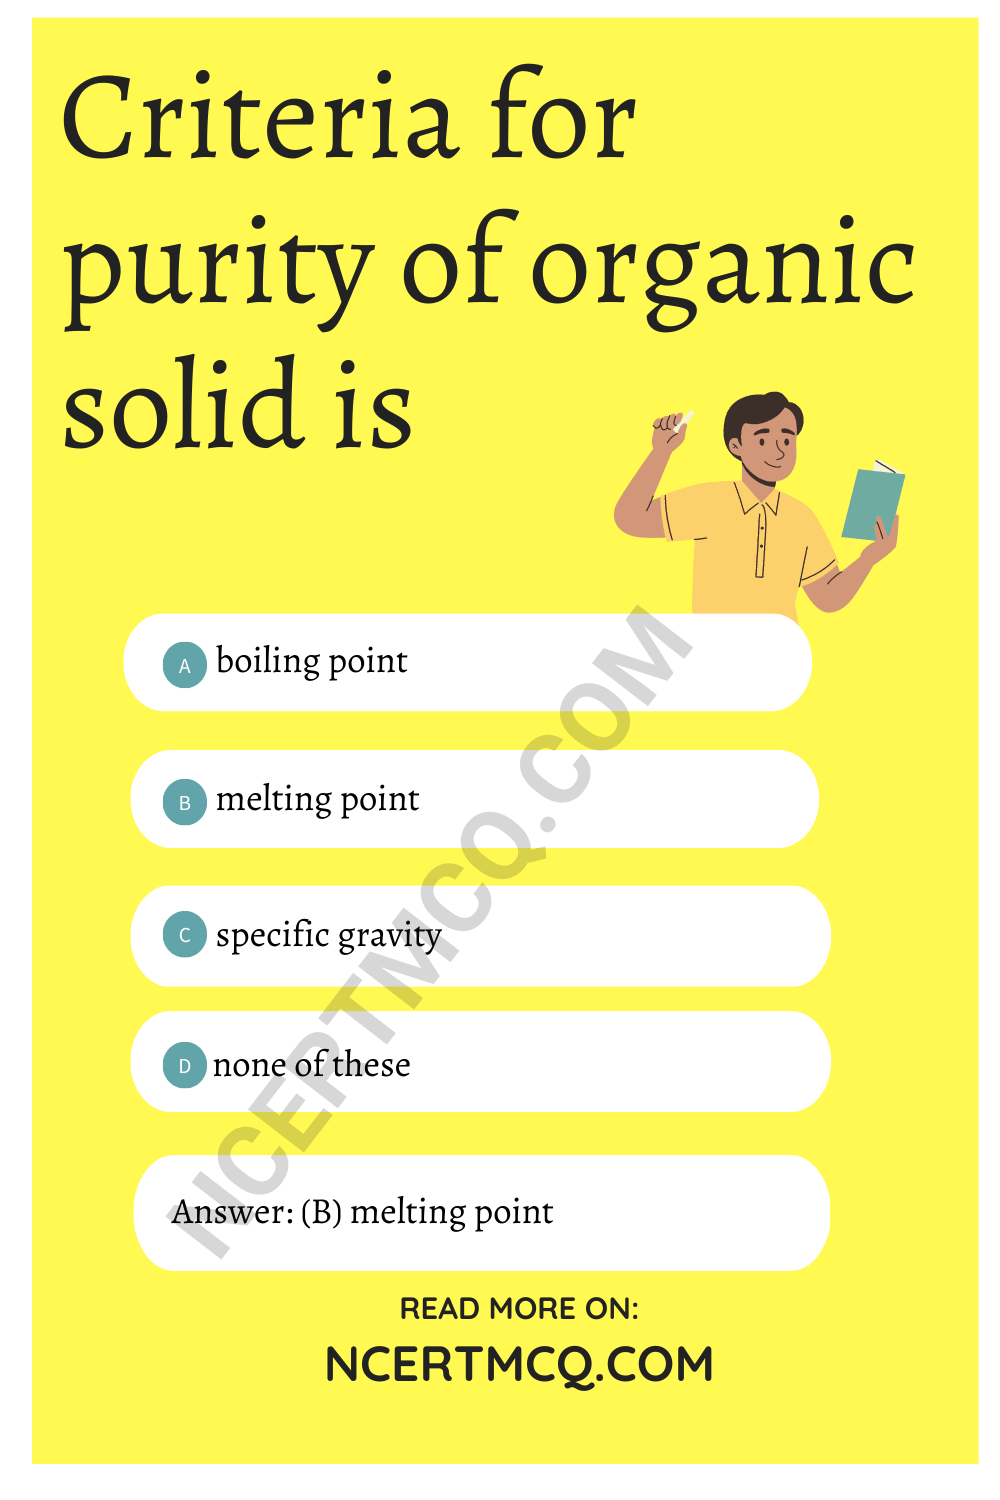 Criteria for purity of organic solid is